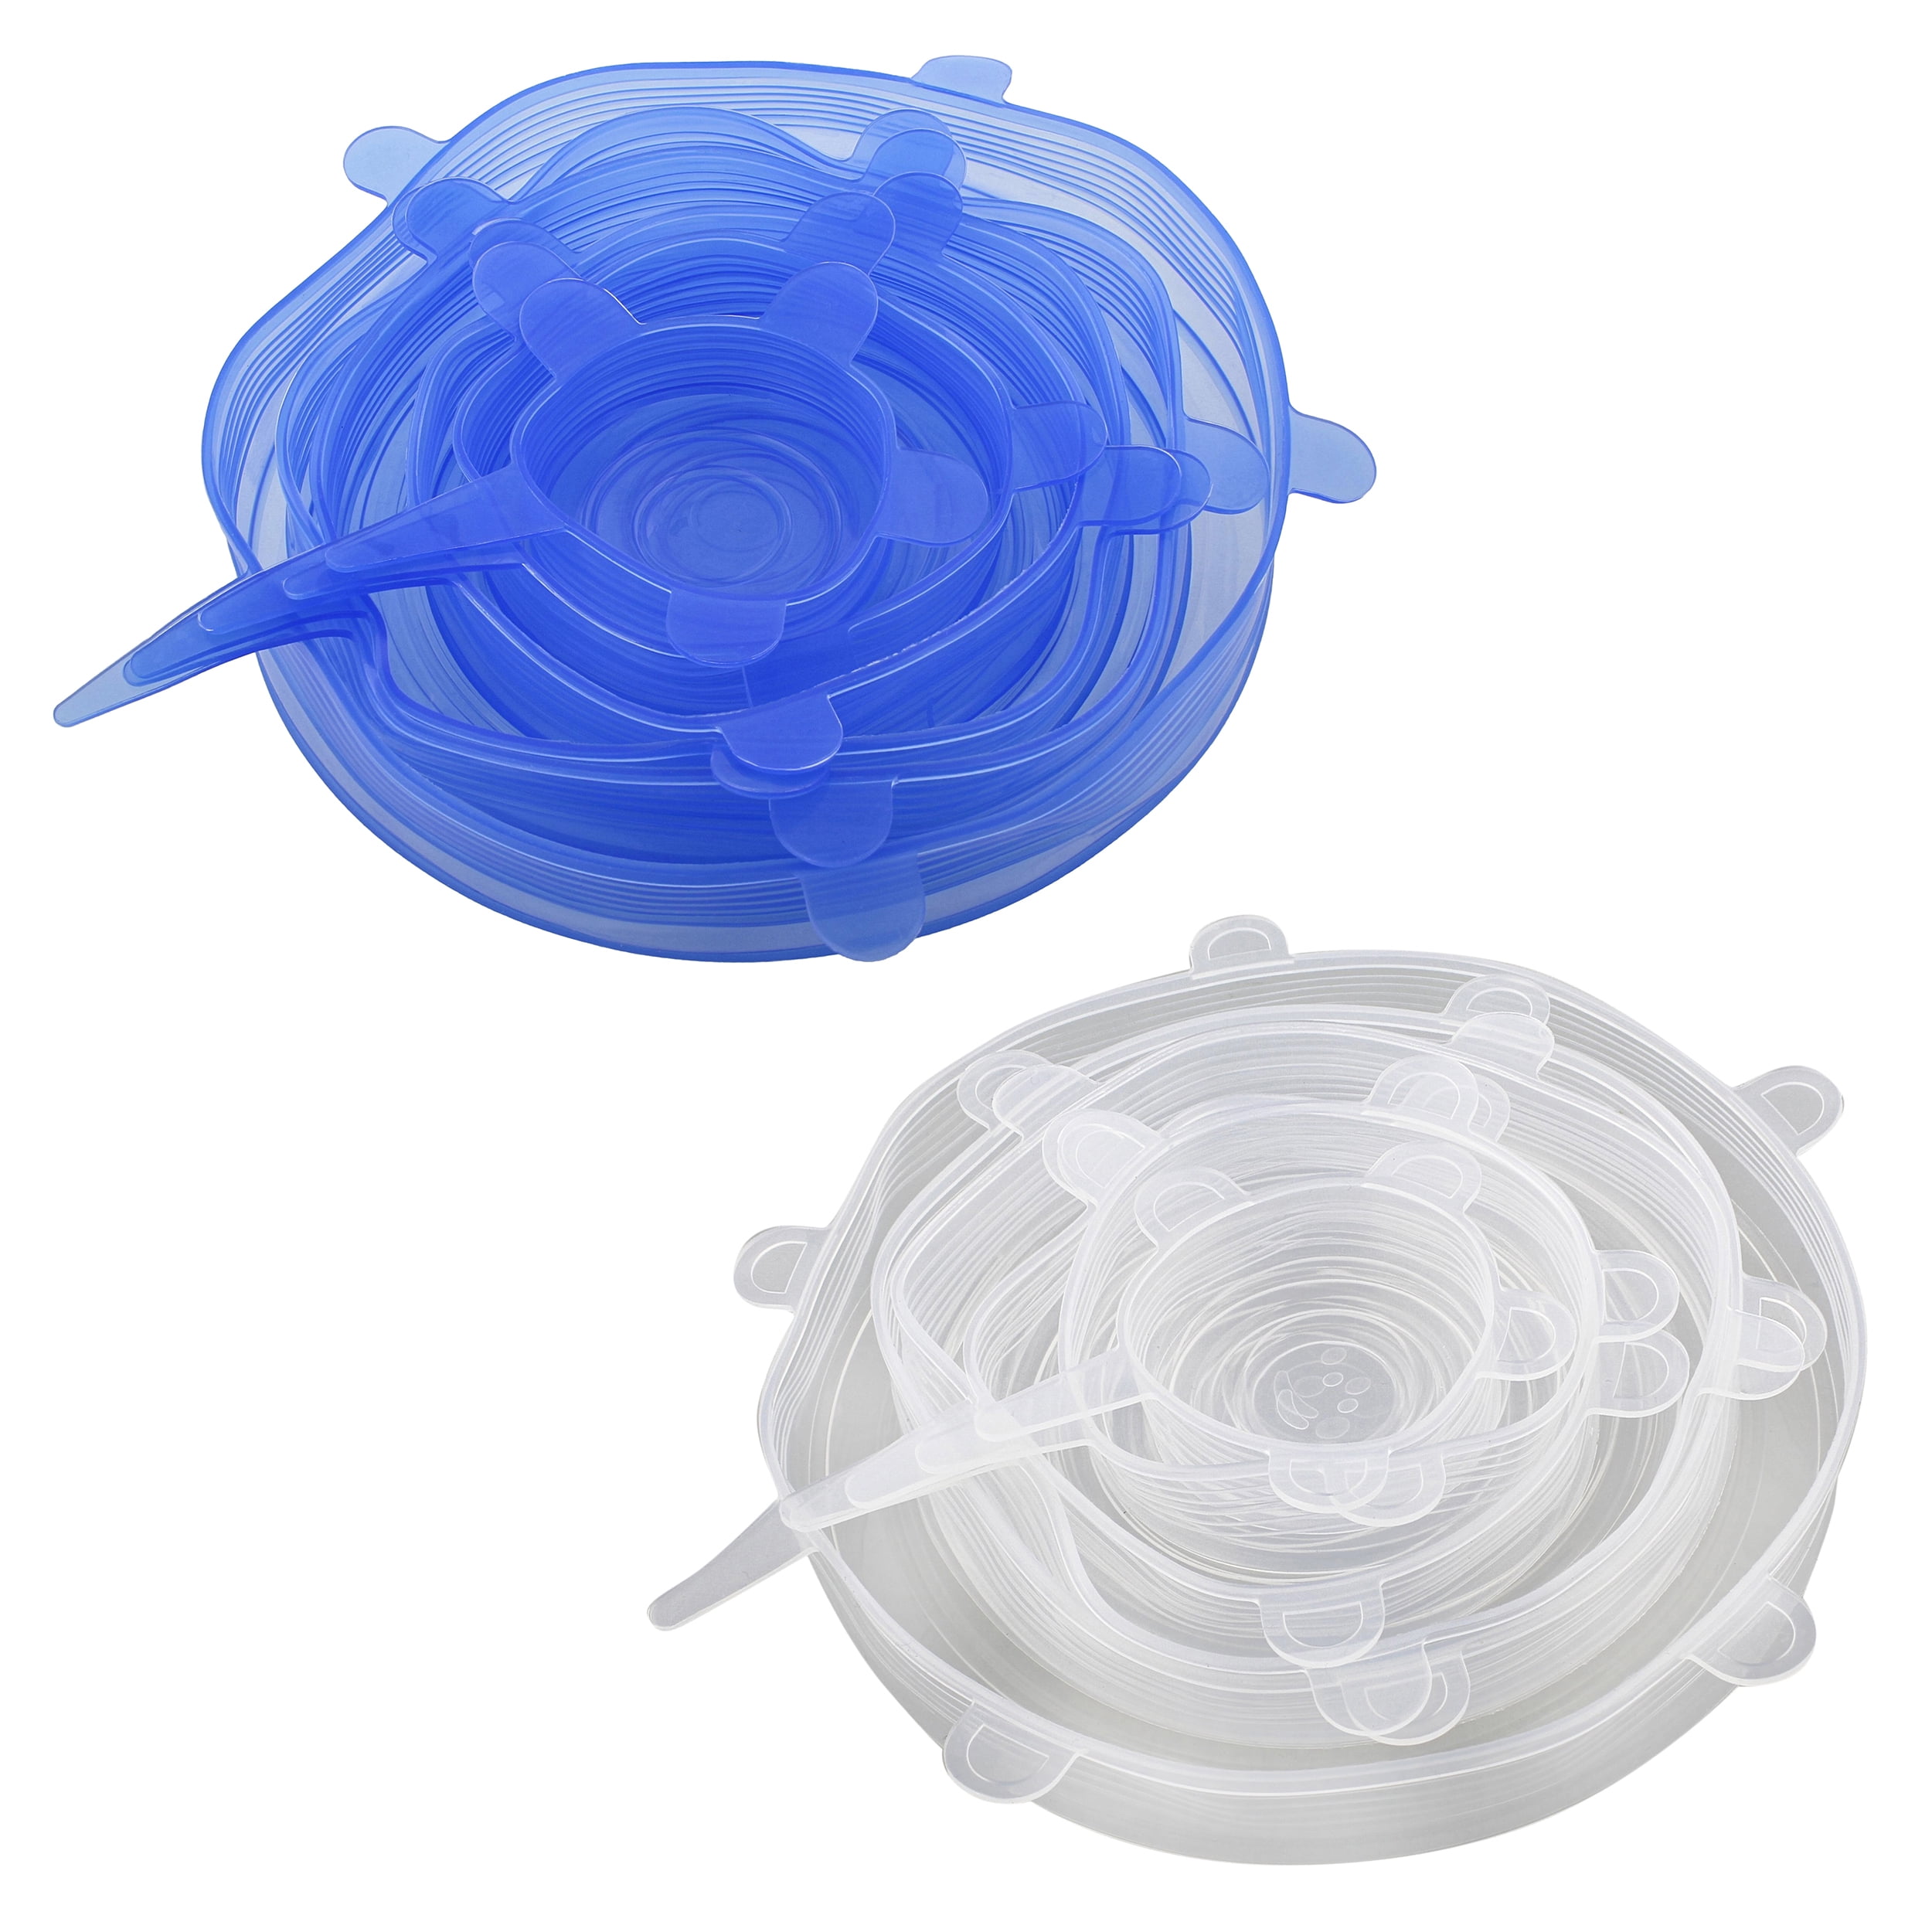  Basic Haus Microwave Cover Silicone Lids - Set of 5: 6